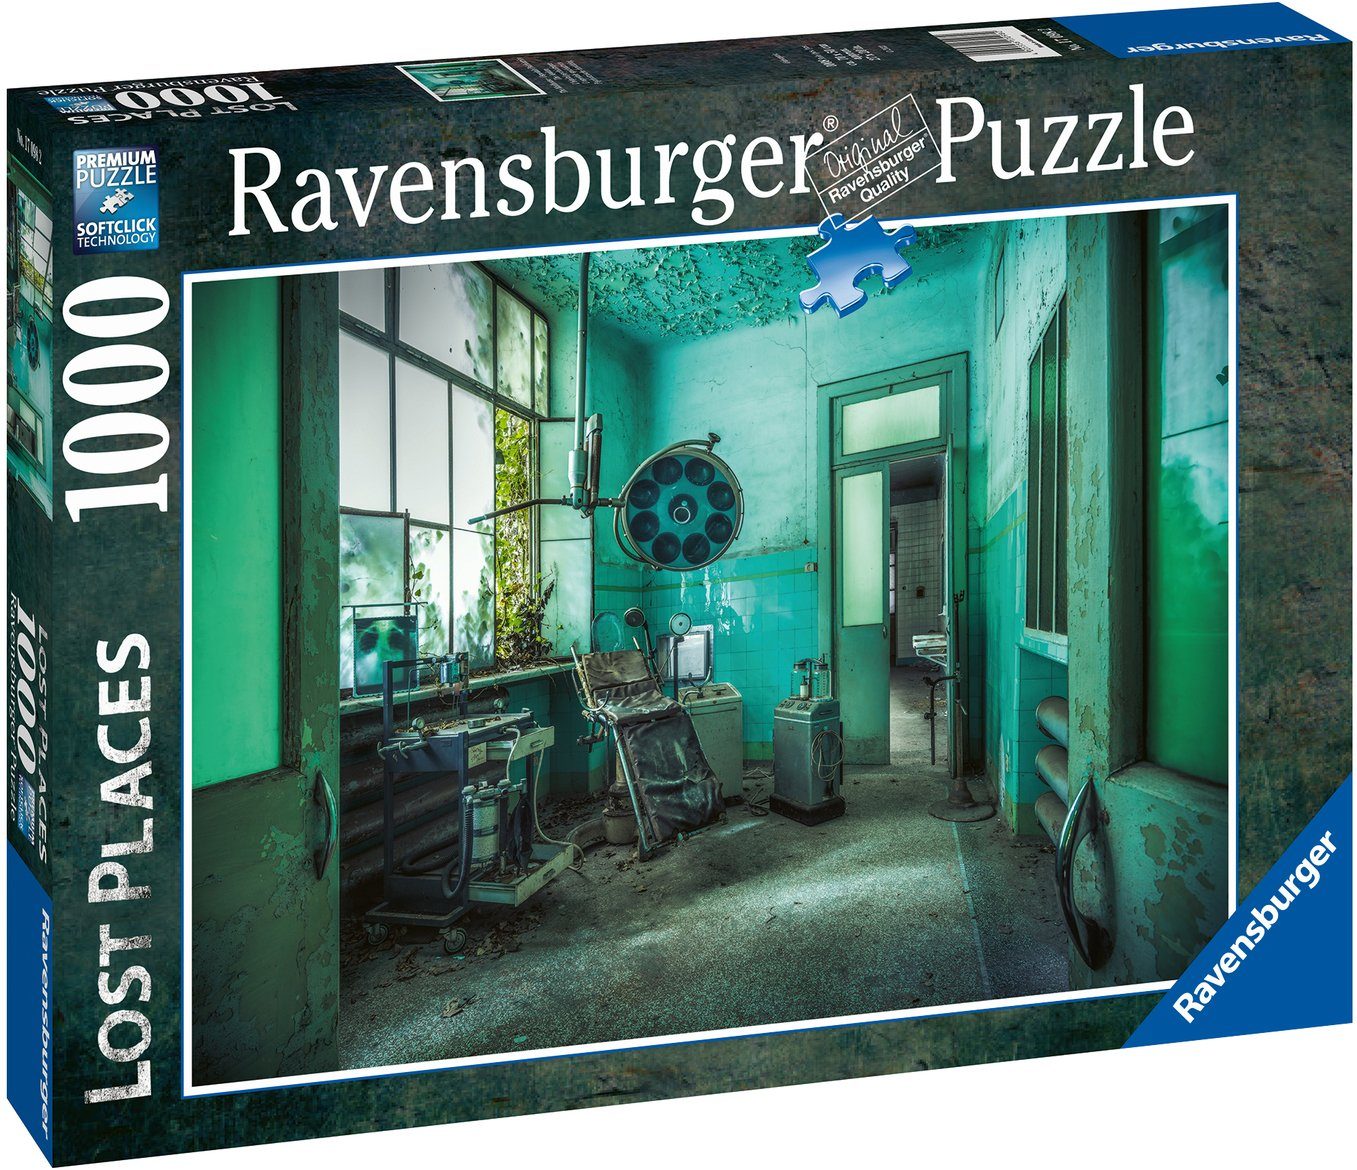 weltweit 1000 Ravensburger Puzzleteile, in Germany, Places, Made FSC® - Madhouse, Puzzle Wald - The Lost schützt